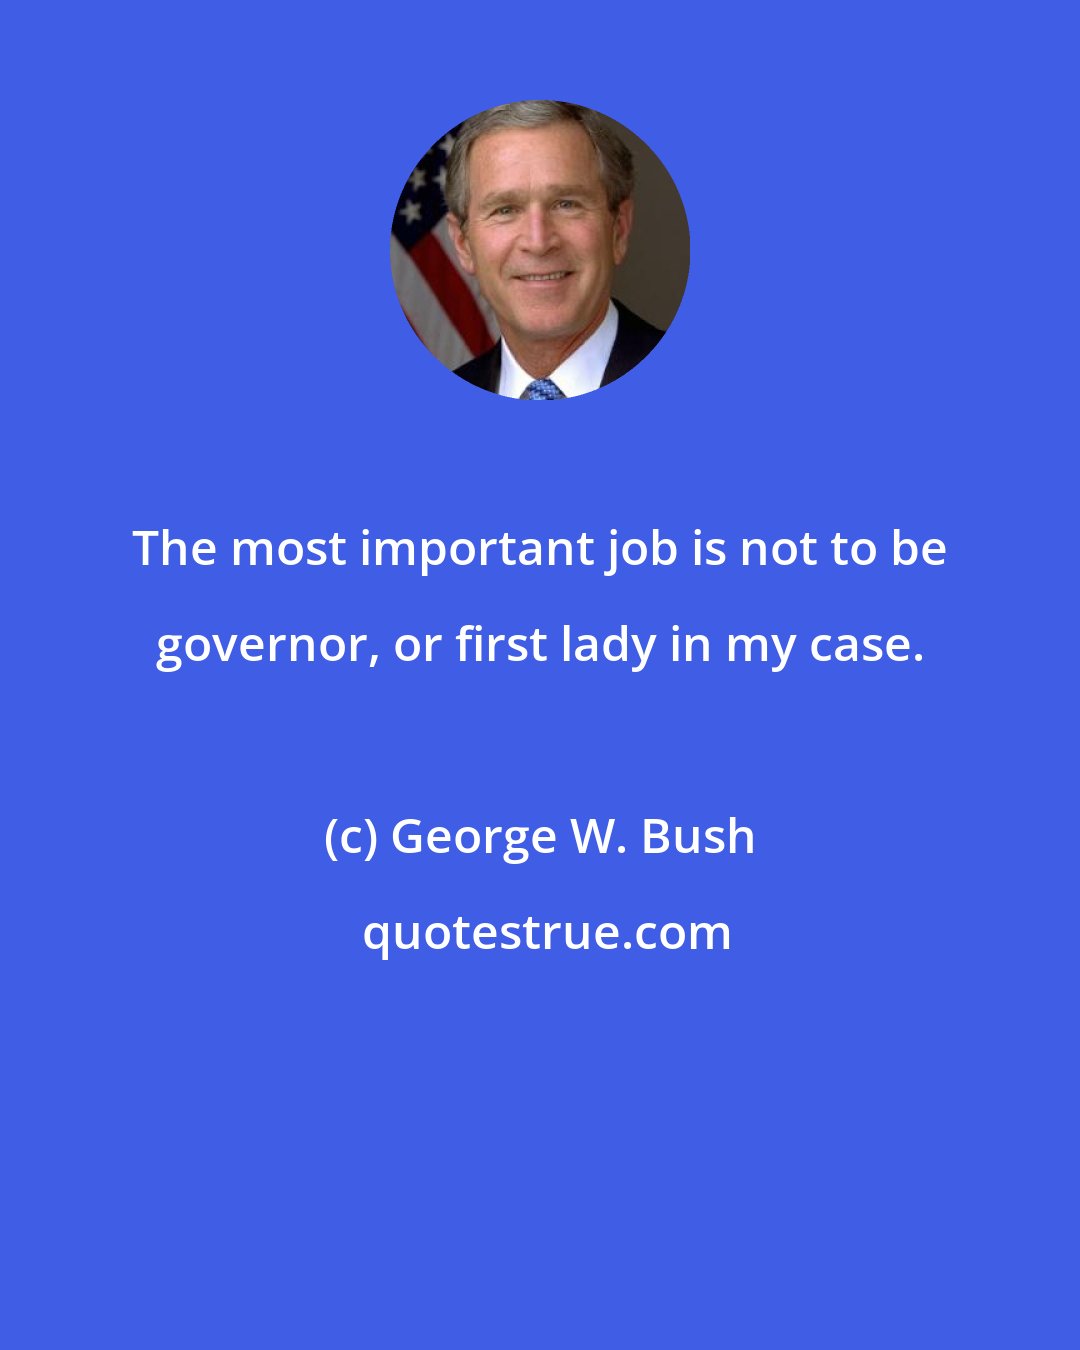 George W. Bush: The most important job is not to be governor, or first lady in my case.